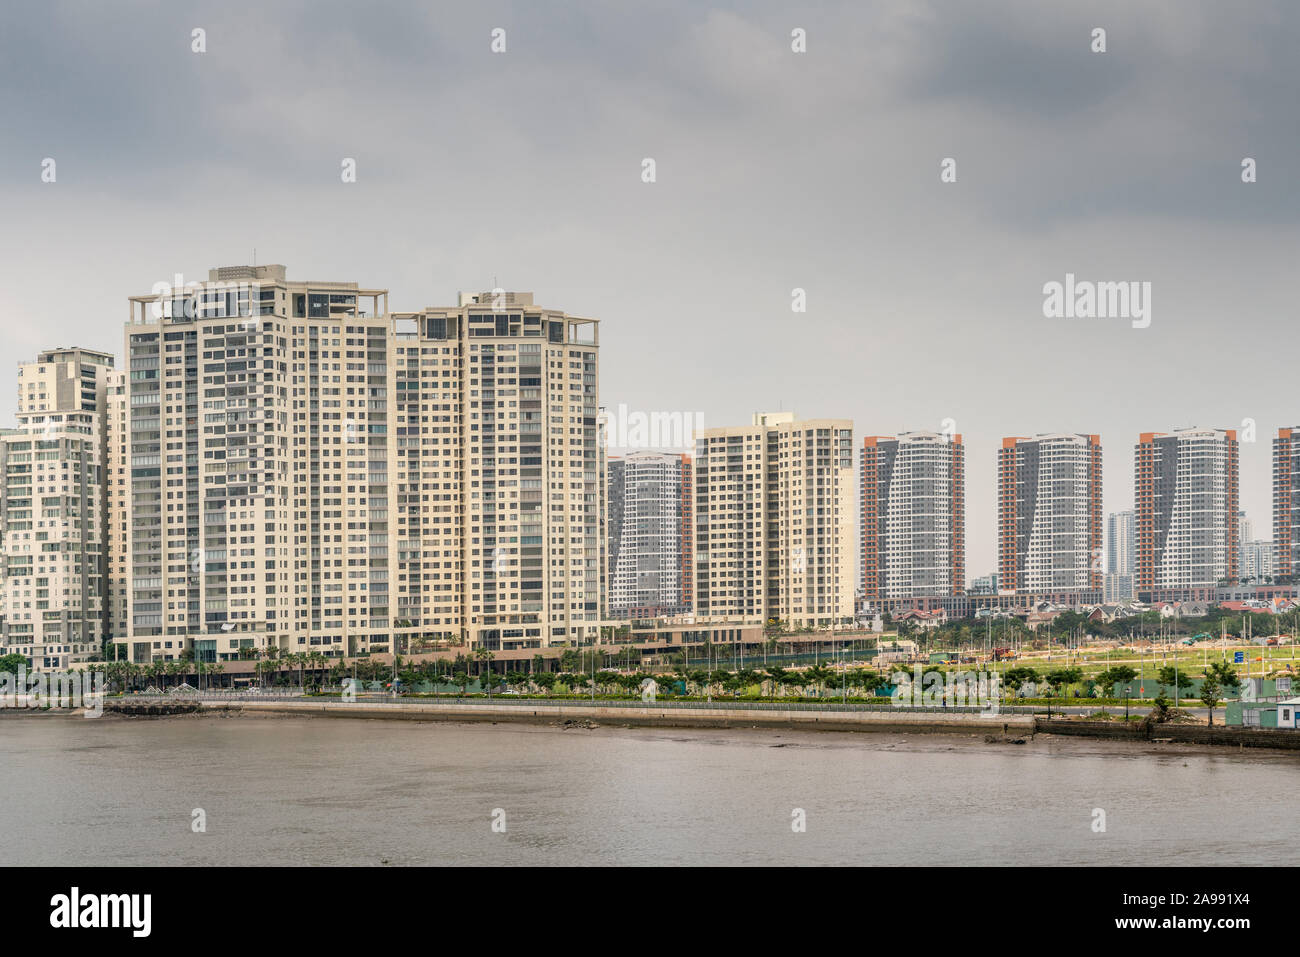 Ho Chi Minh City, Vietnam - March 12, 2019: Song Sai Gon river. High rise apartment buildings form skyline in Binh Trung Tay neighborhood accross the Stock Photo